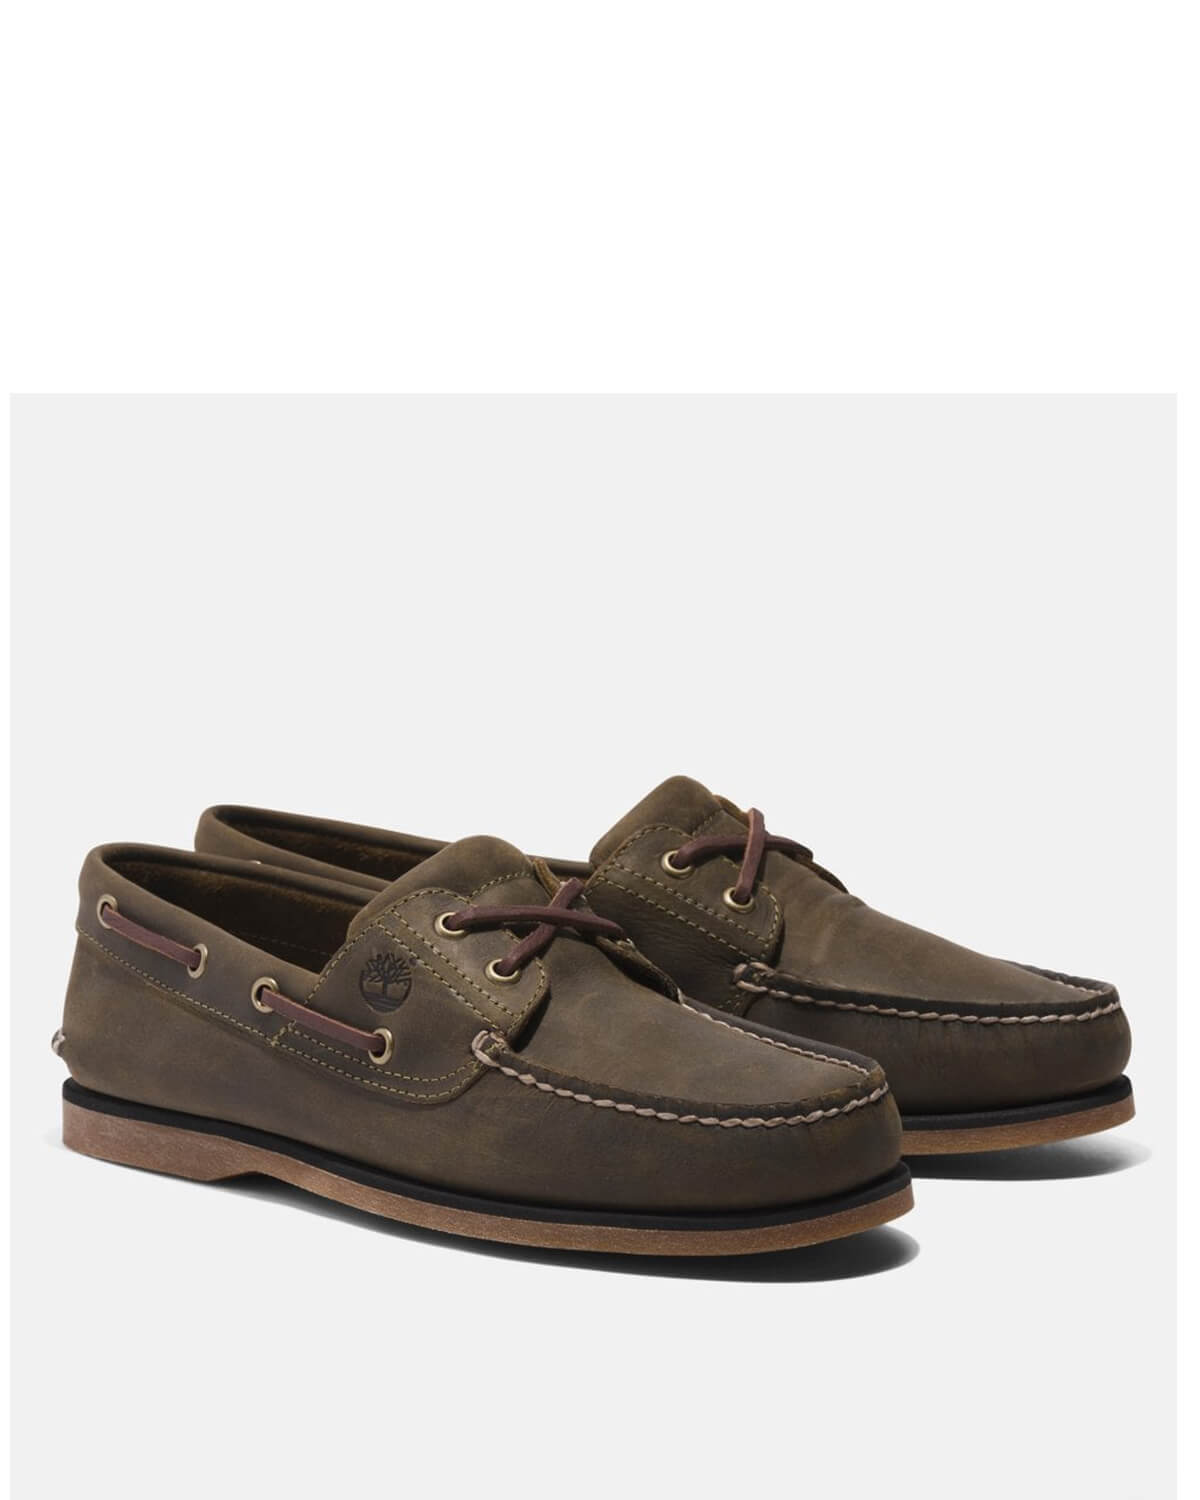 Timberland - Classic Boat Boat Shoes Green | Favela.gr